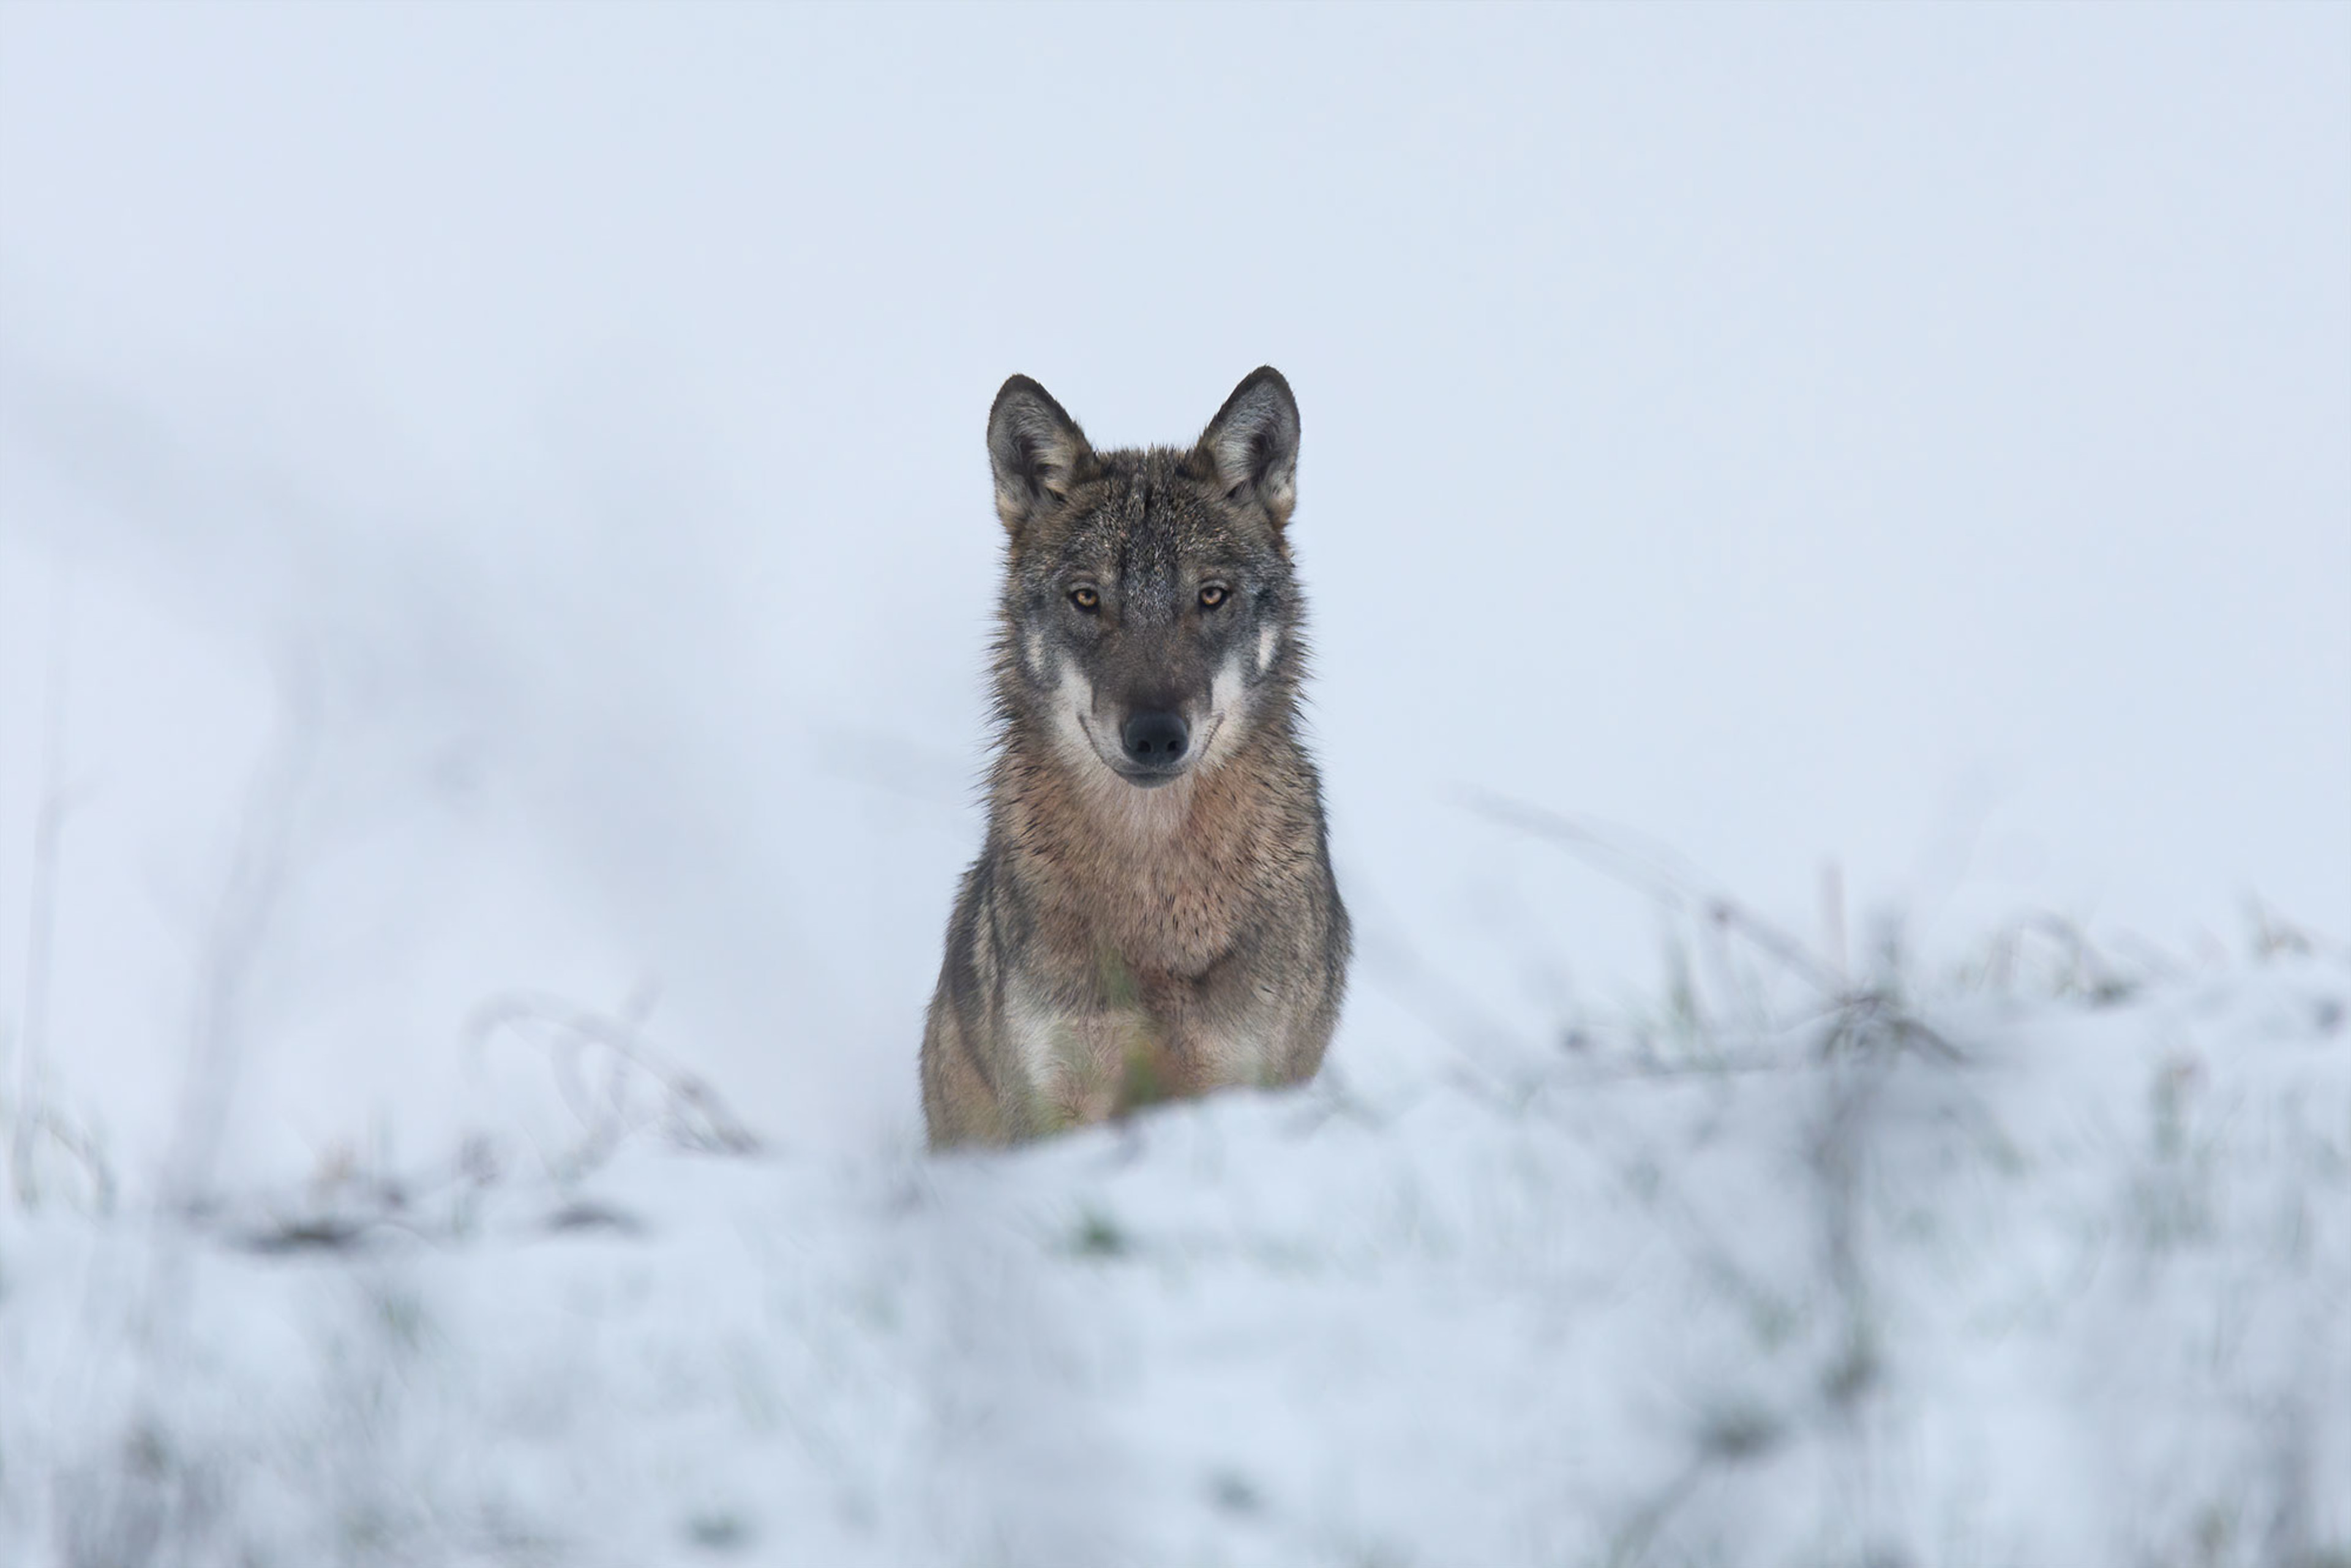 Image of wolf in snow from partner